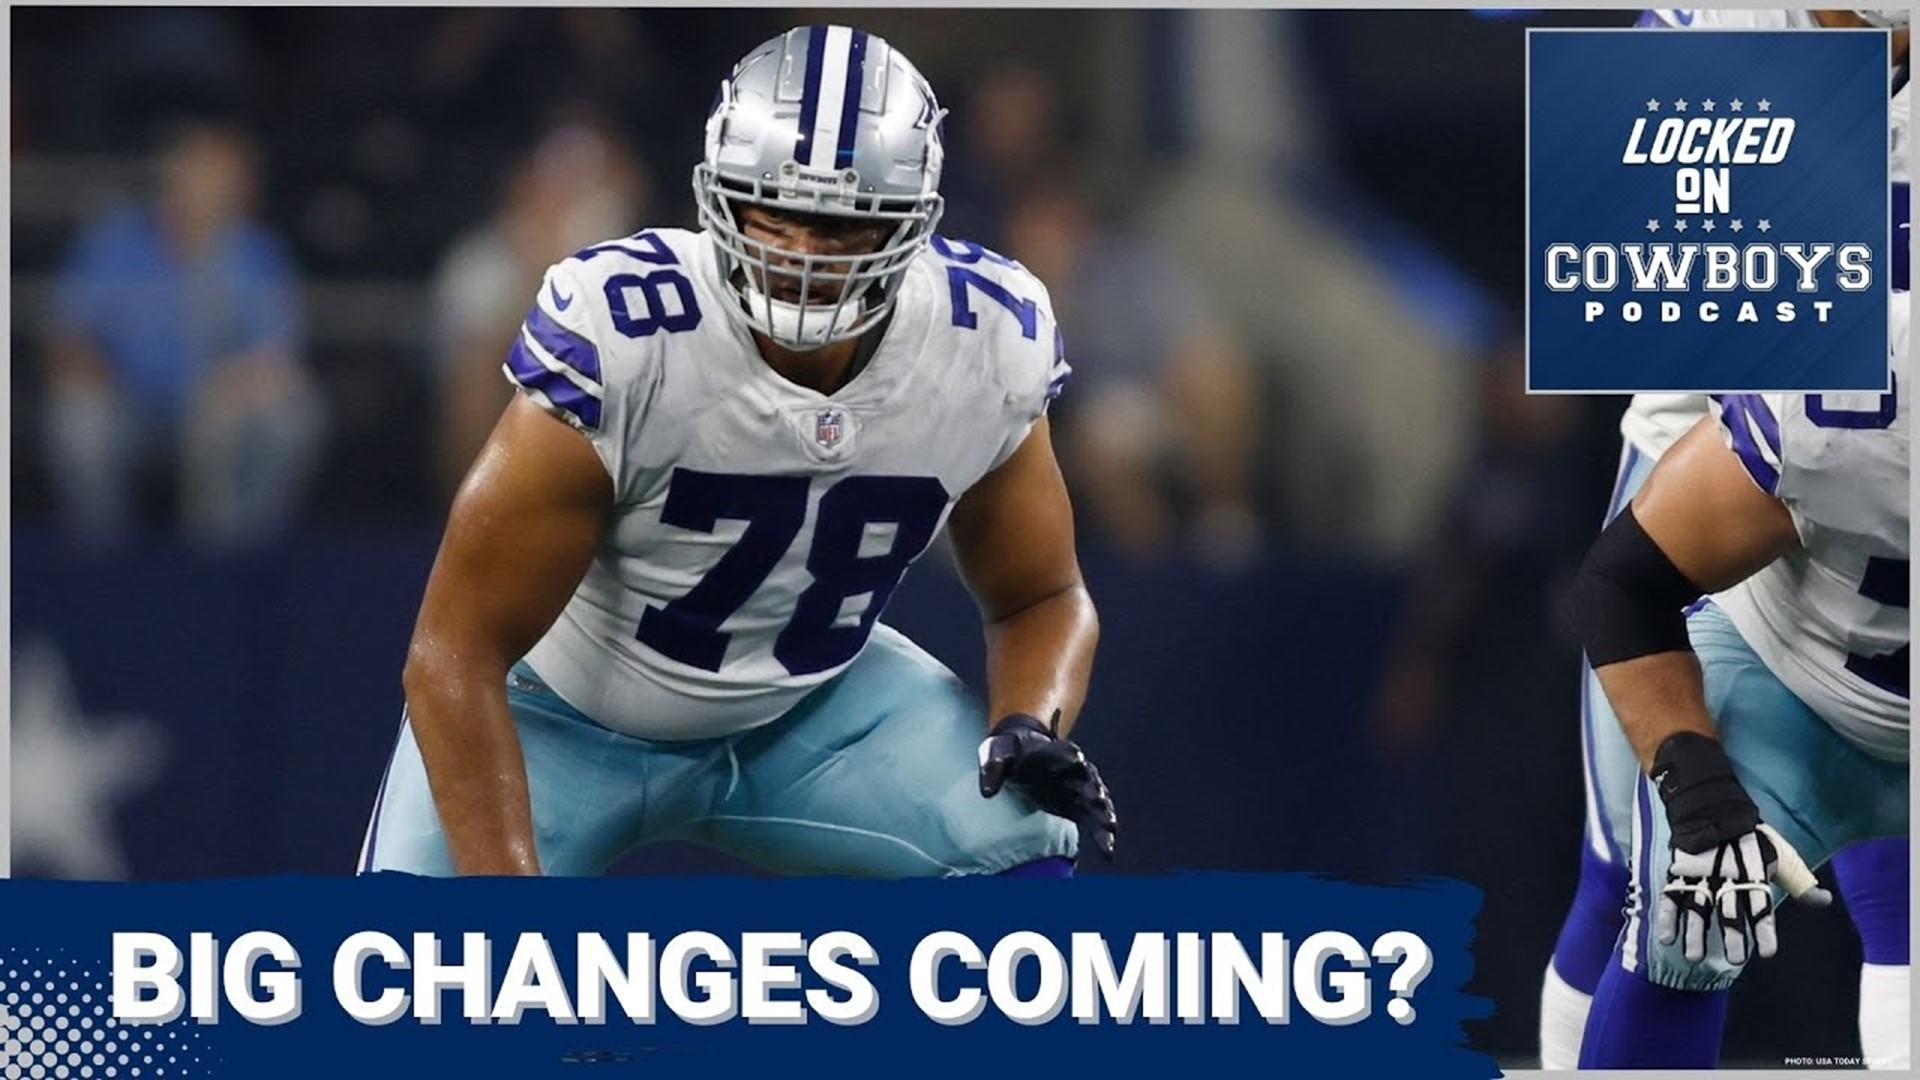 Marcus Mosher and Landon McCool discuss the latest comments by Jerry Jones on the state of the offensive line. They touch on Terence Steele's starting job.